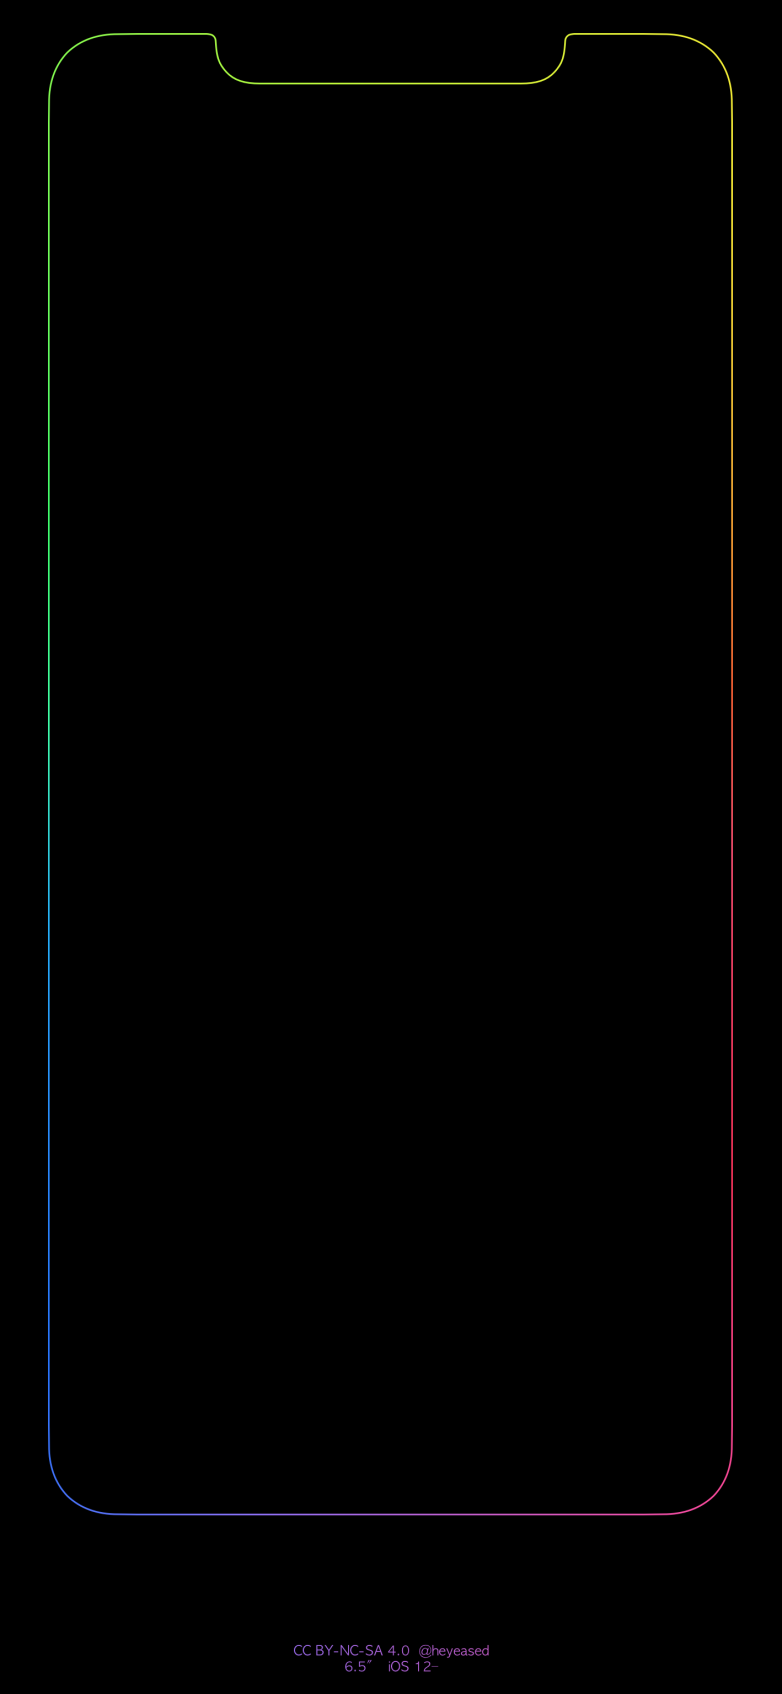 The ultimate iPhone X wallpaper has finally been updated for the